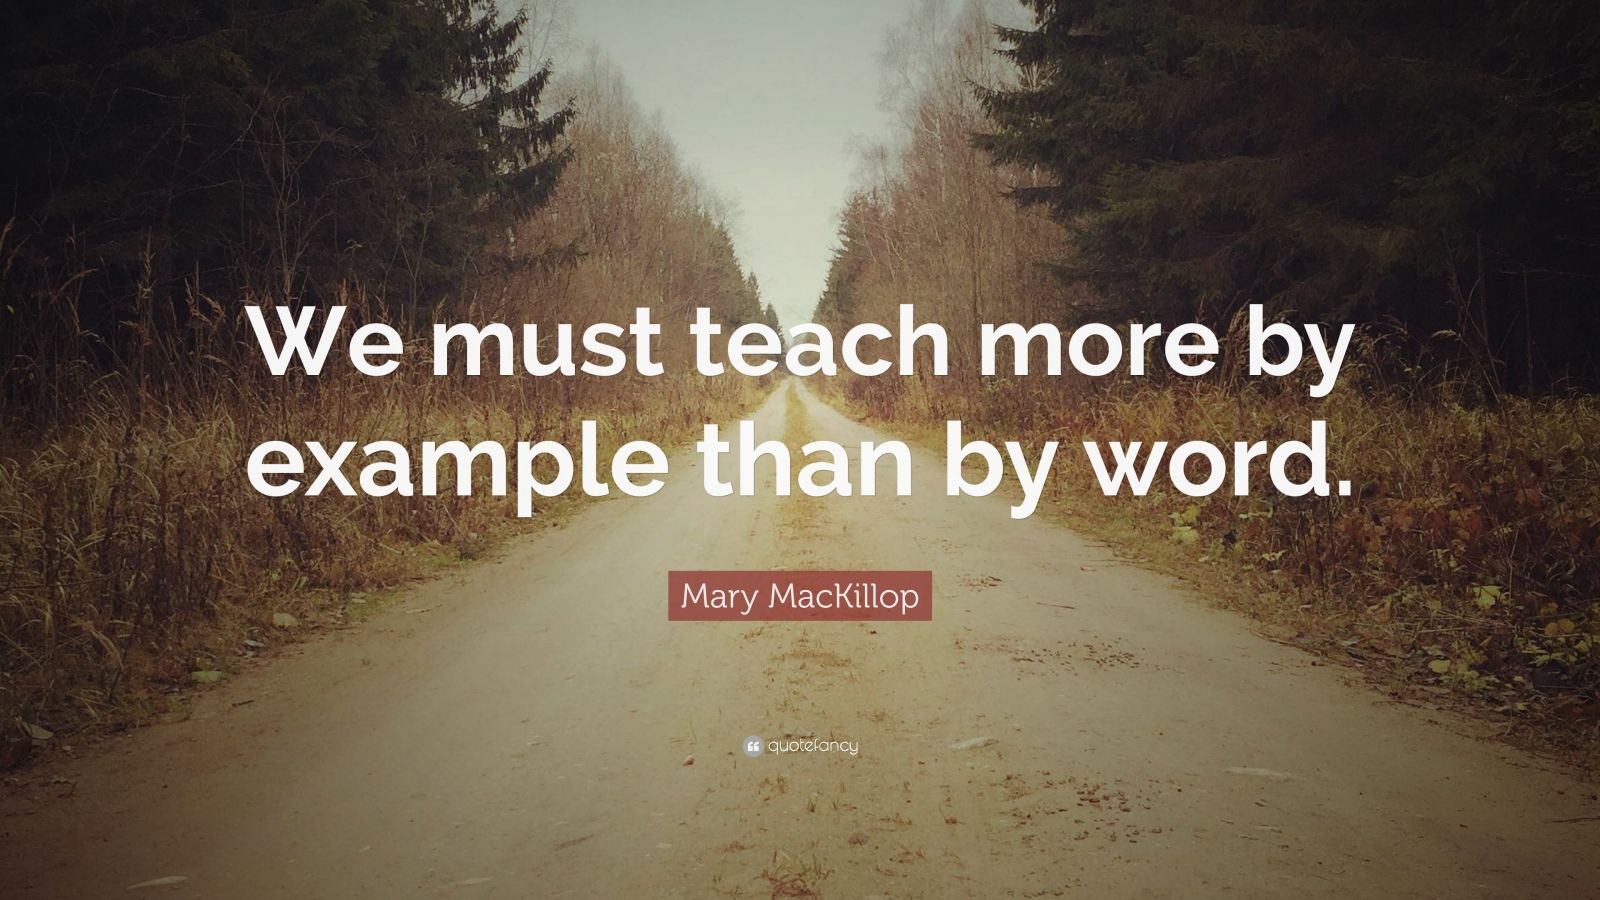 Mary MacKillop Quotes (6 wallpapers) - Quotefancy